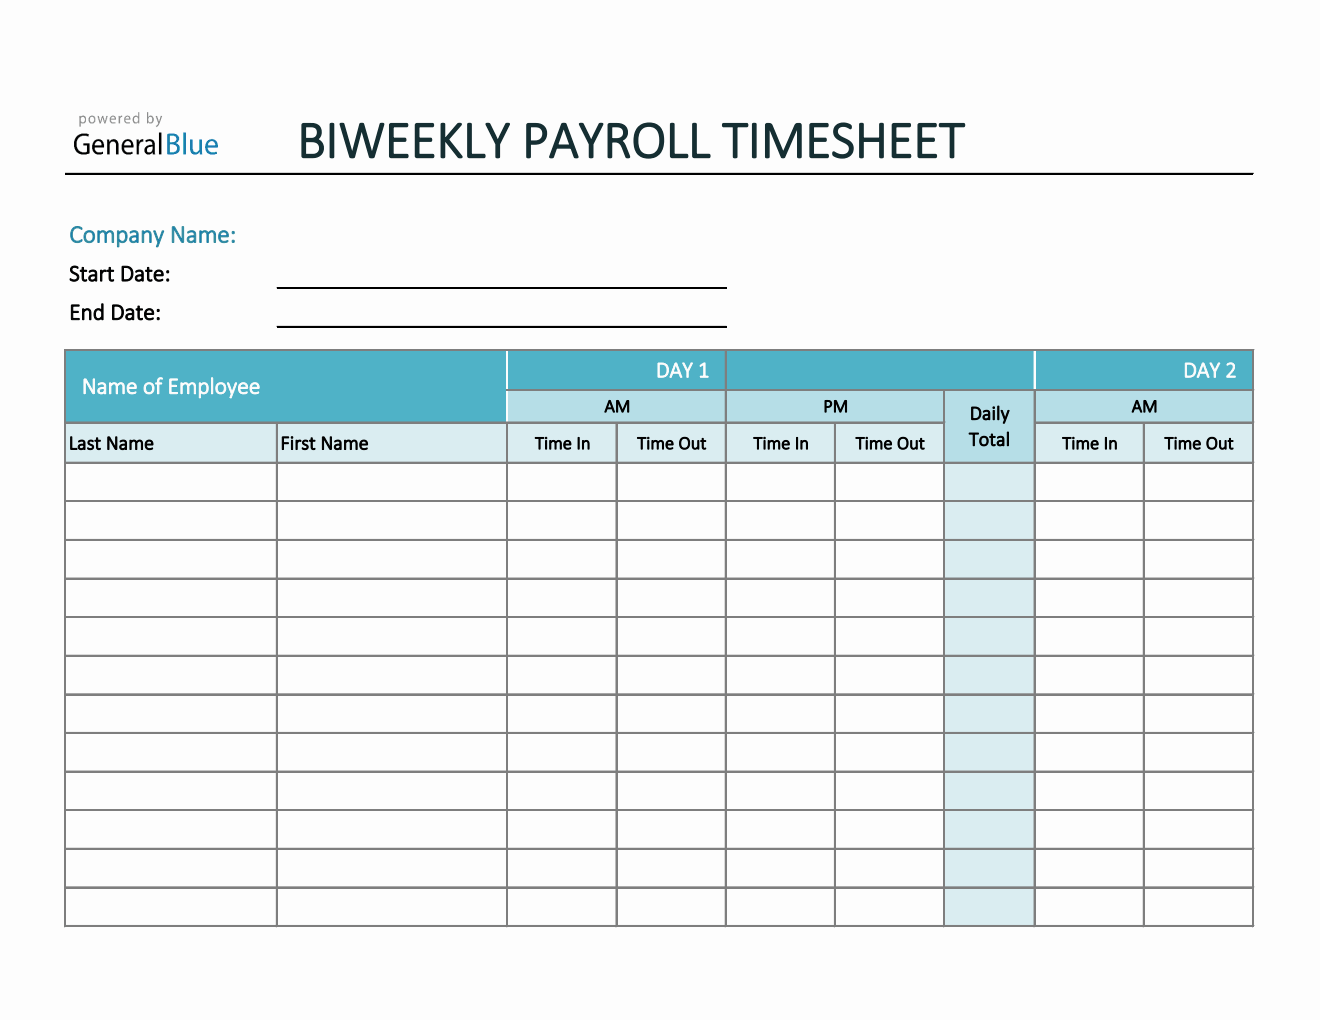 Excel Biweekly Payroll Timesheet for Multiple Employees